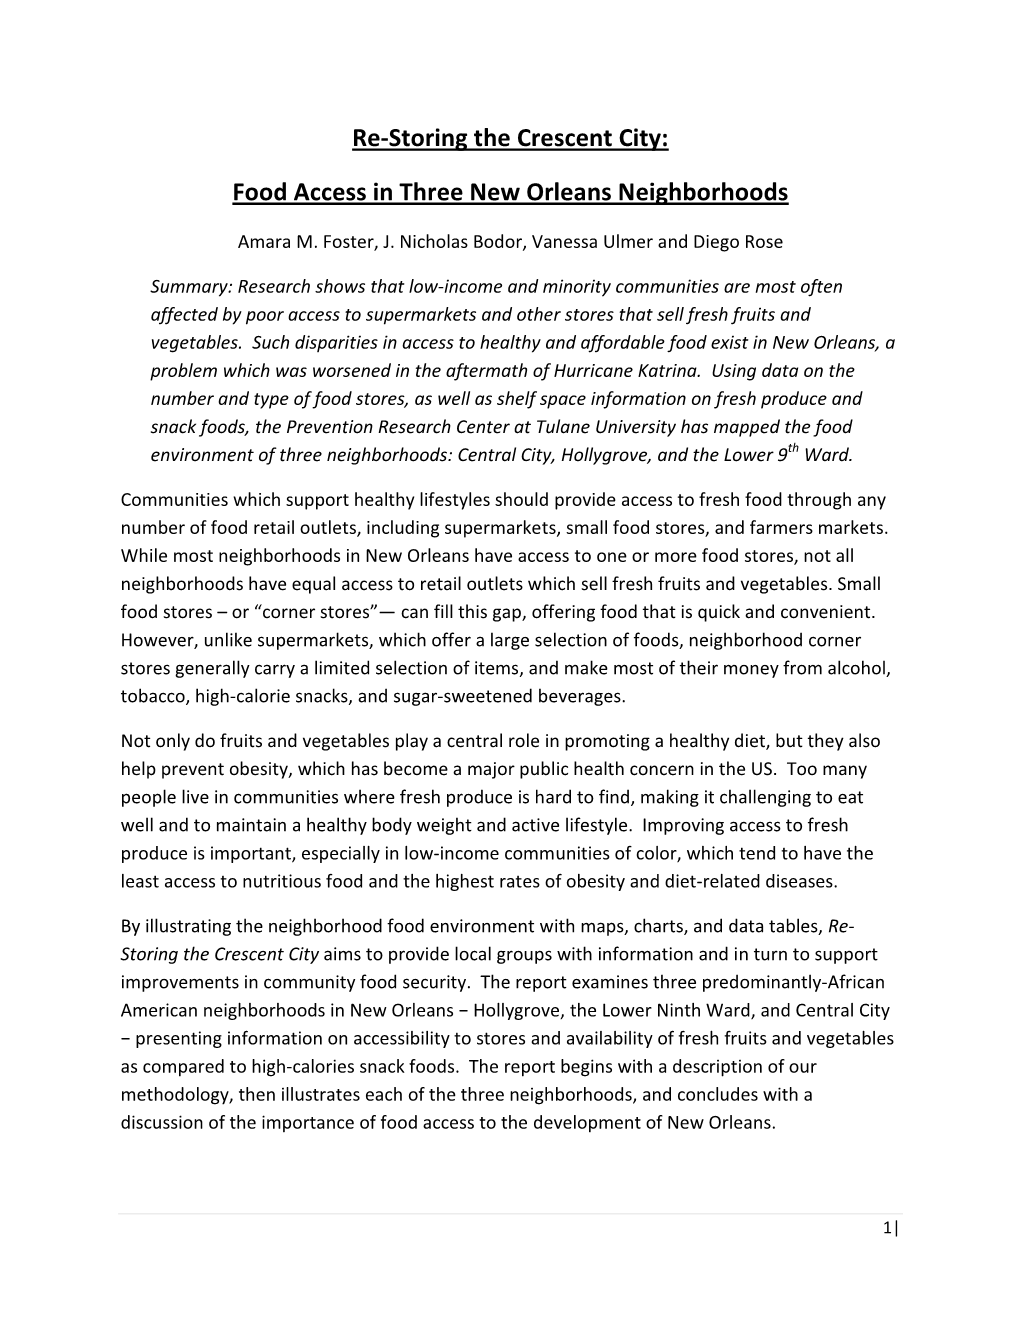 Re-Storing the Crescent City: Food Access in Three New Orleans